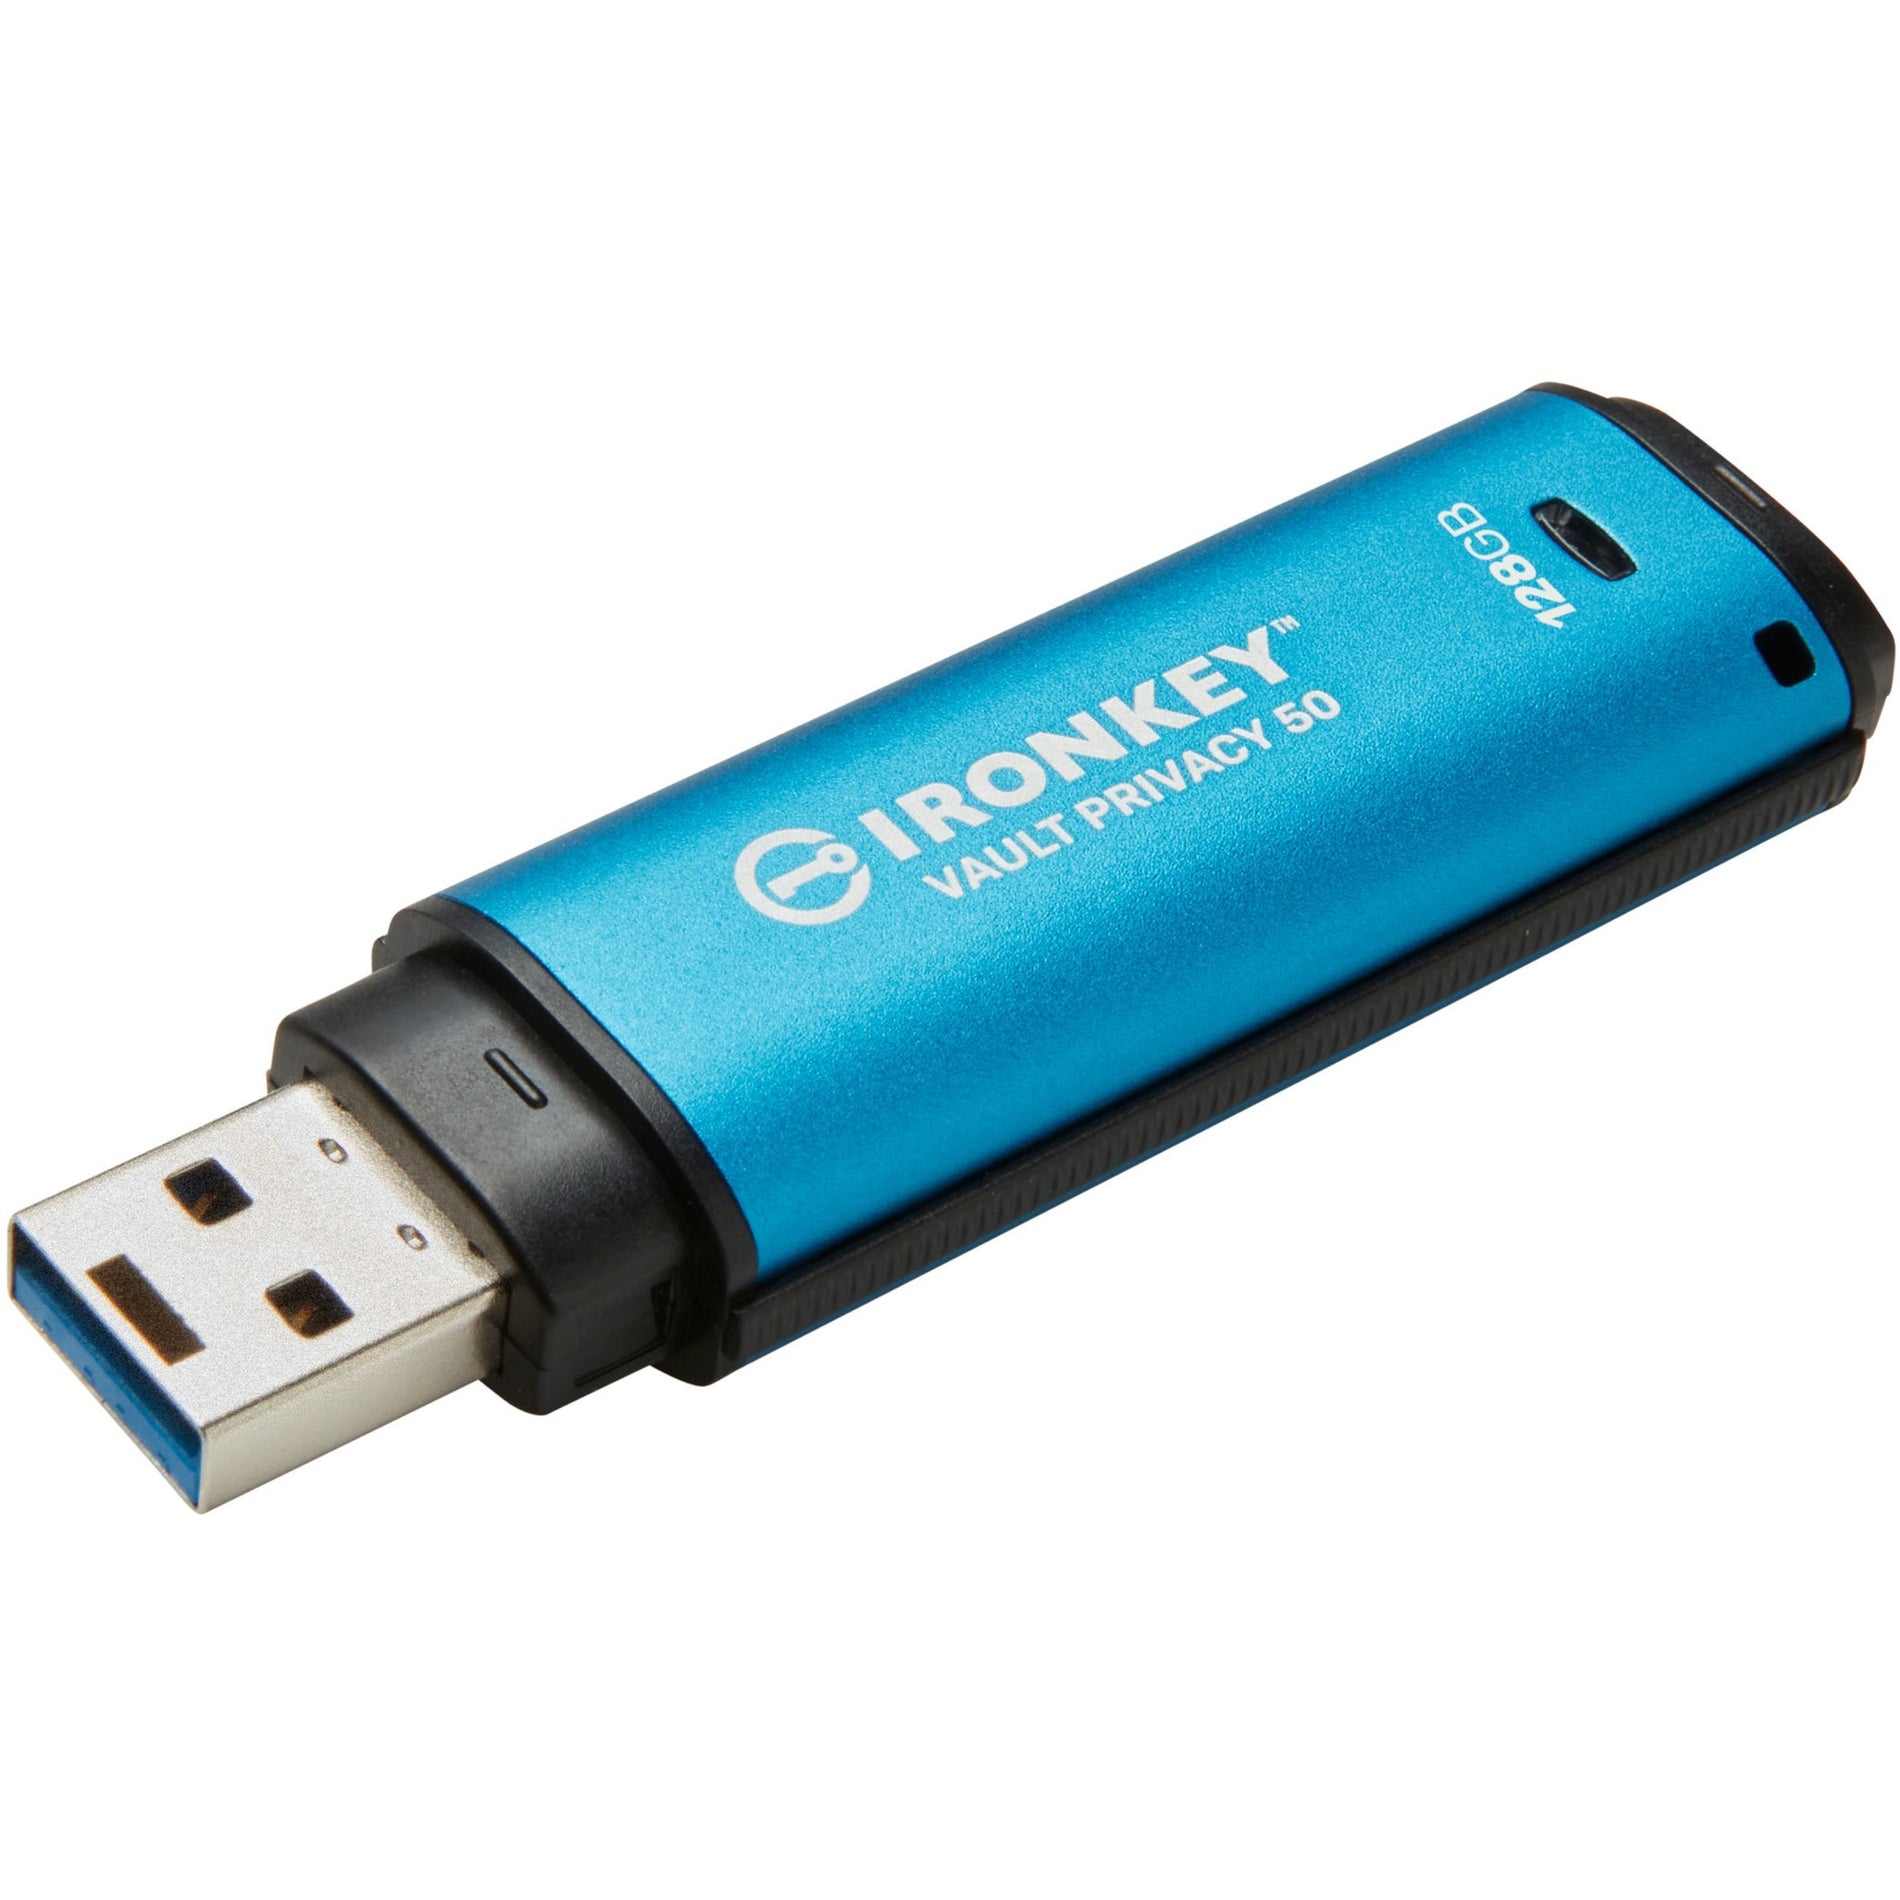 IronKey IKVP50/128GB Vault Privacy 50 Series 128GB USB 3.2 (Gen 1) Type A Flash Drive, Password Protection, 256-bit AES Encryption